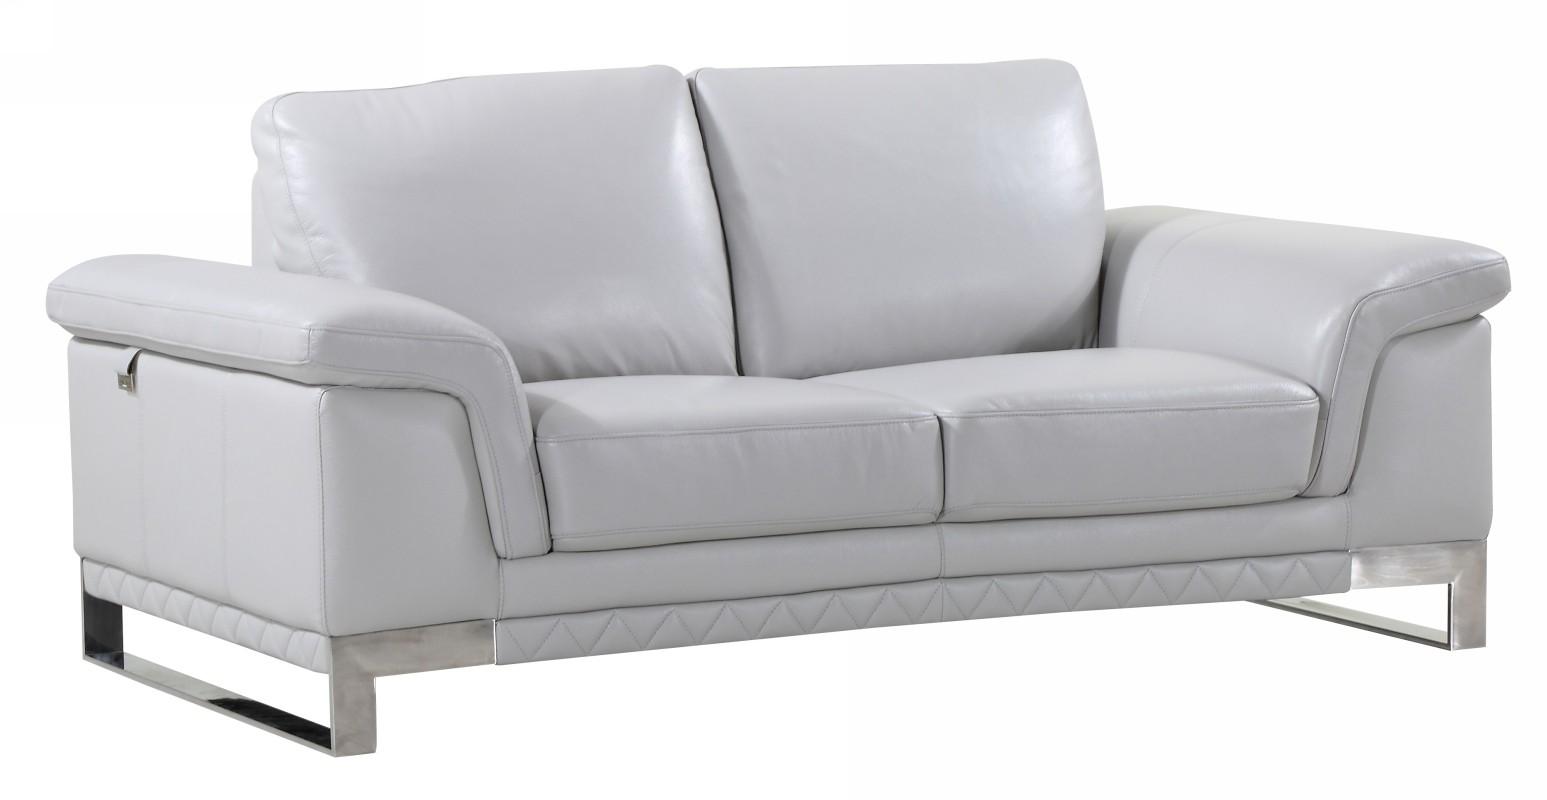 Contemporary Loveseat 411 411-LIGHT_GRAY-L in Light Gray Genuine Leather